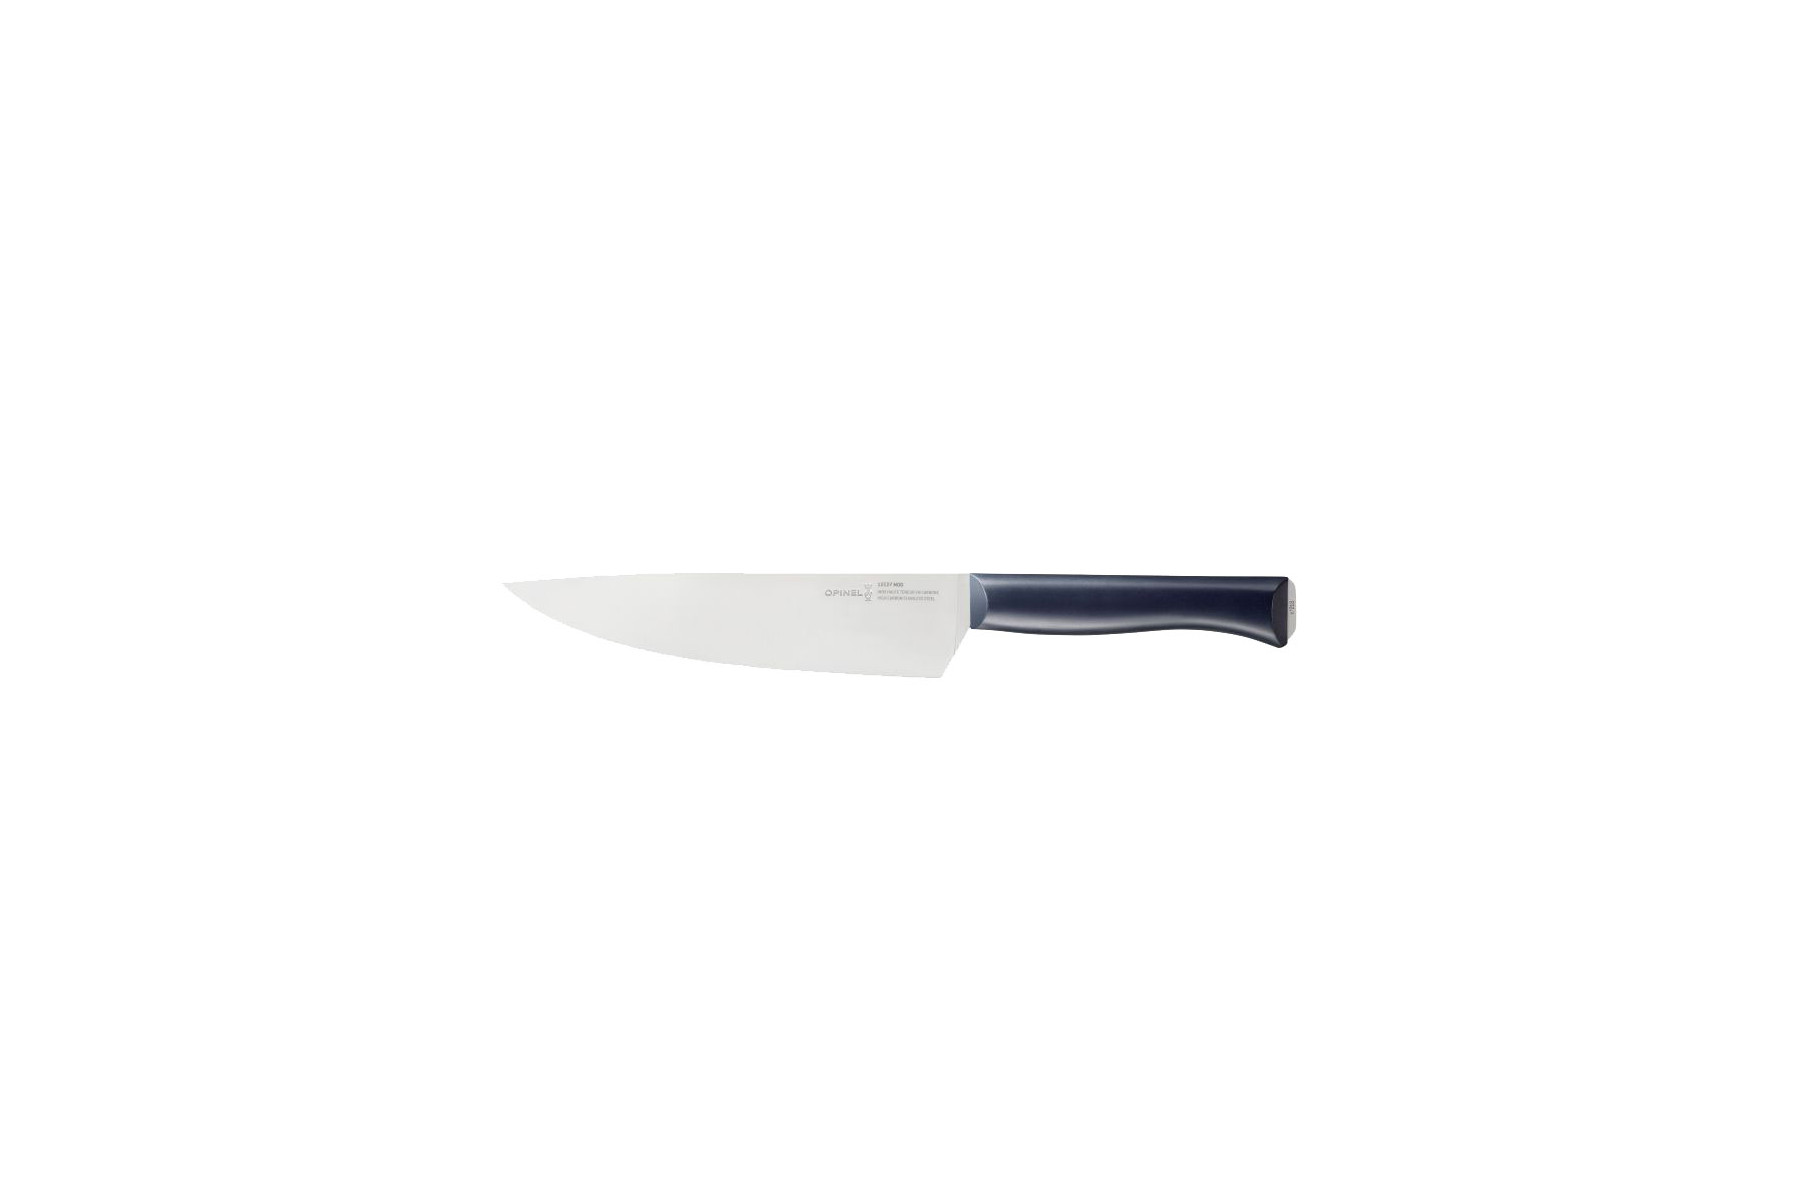 Couteau Chef Opinel INTEMPORA n°218 - 20 cm